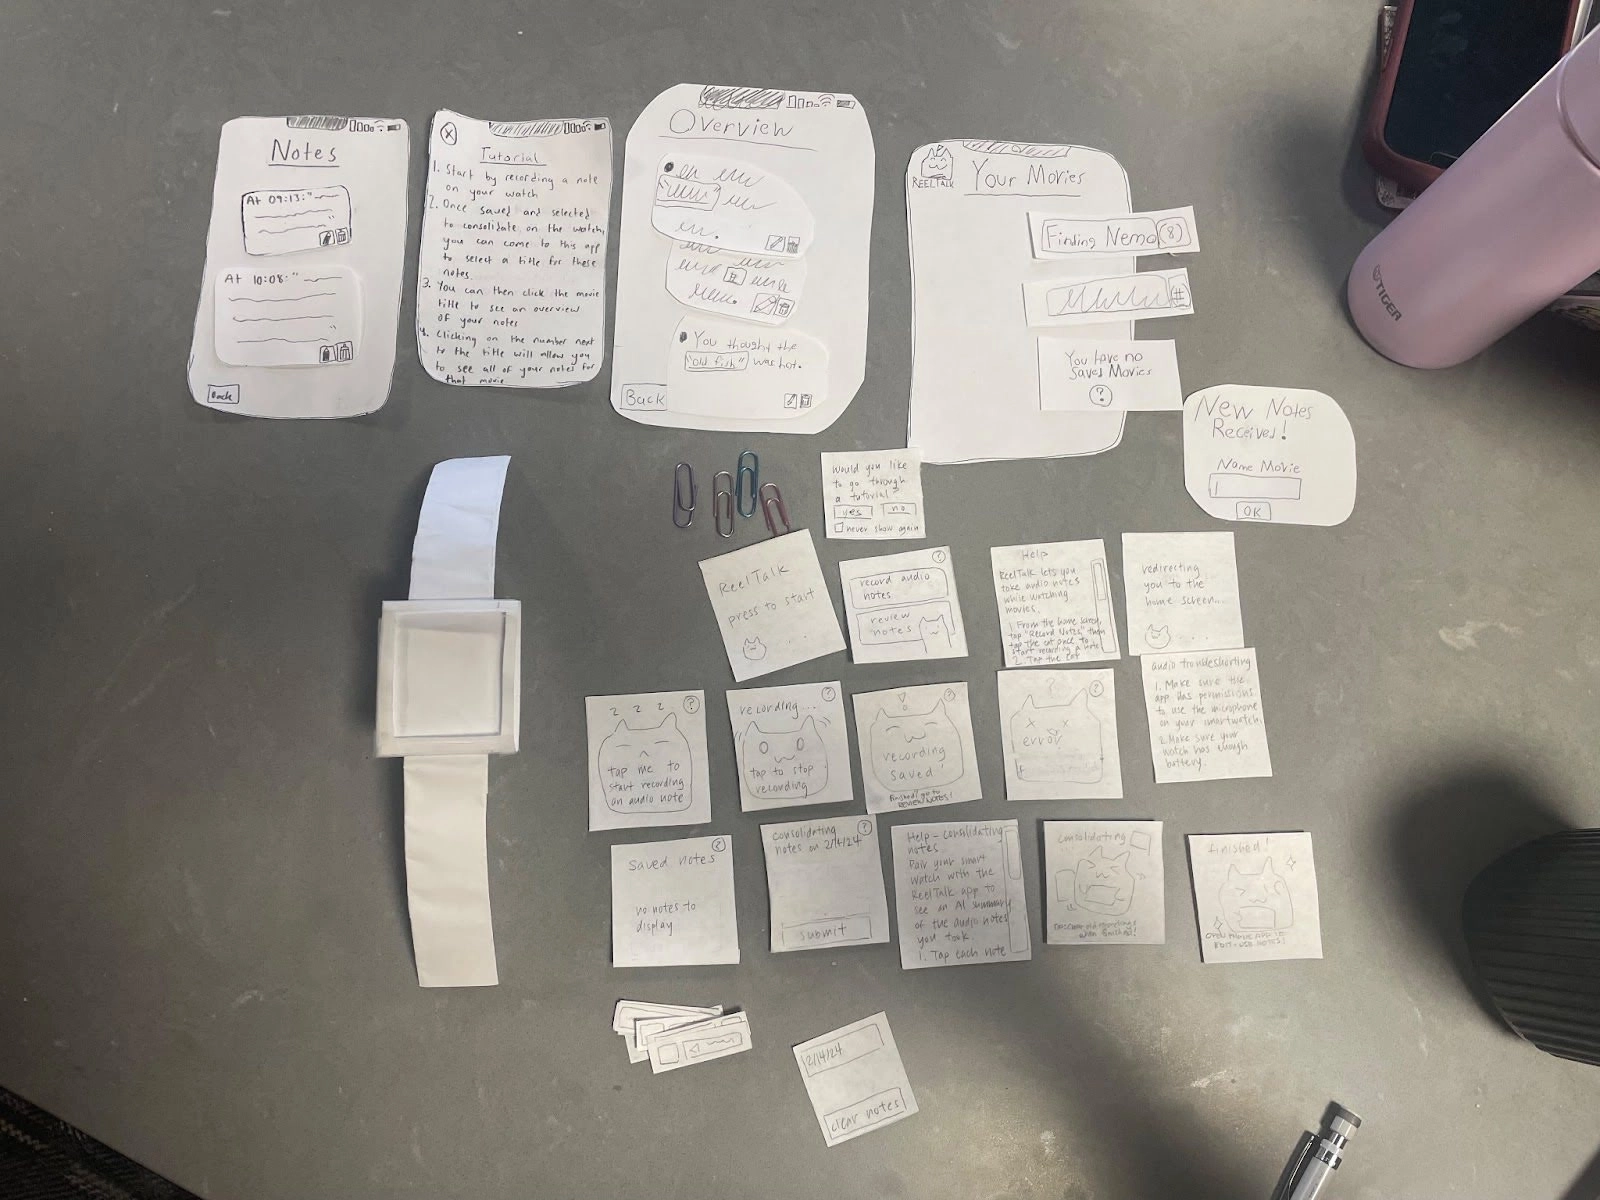 Overview image of paper prototype